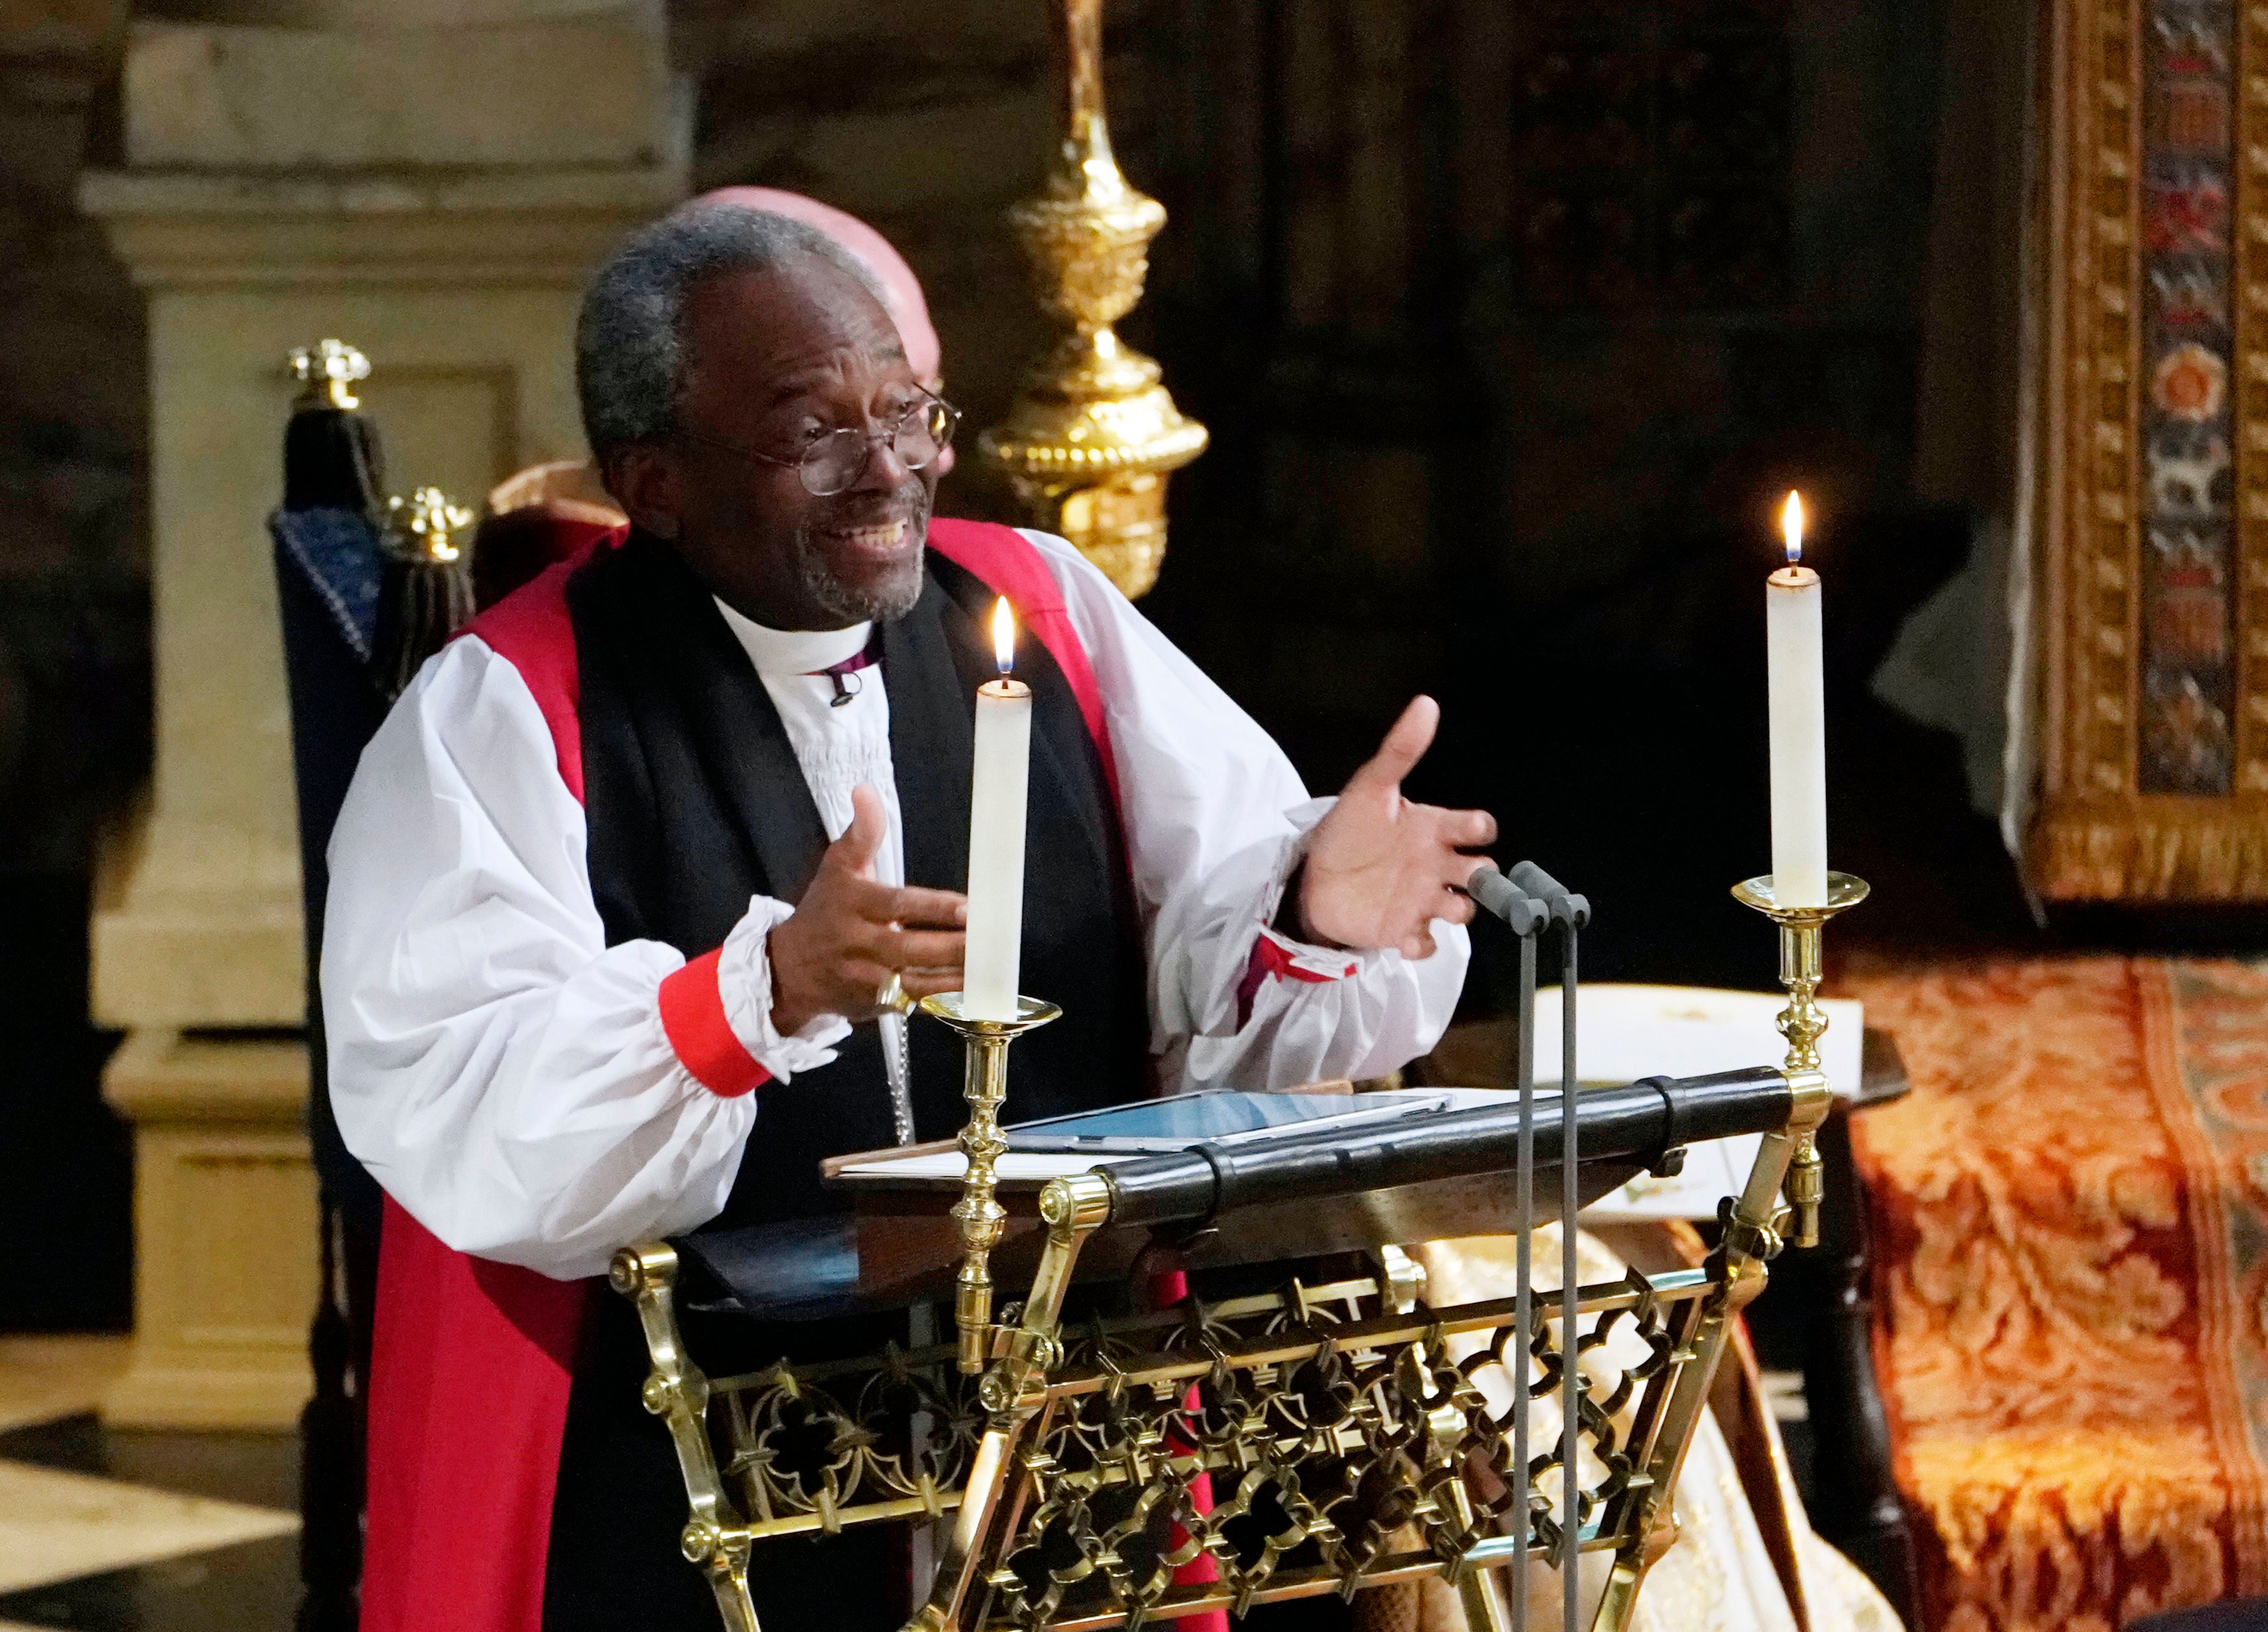 Here Is The Full Transcript Of Most Reverend Bishop Michael Curry's Royal Wedding Sermon
